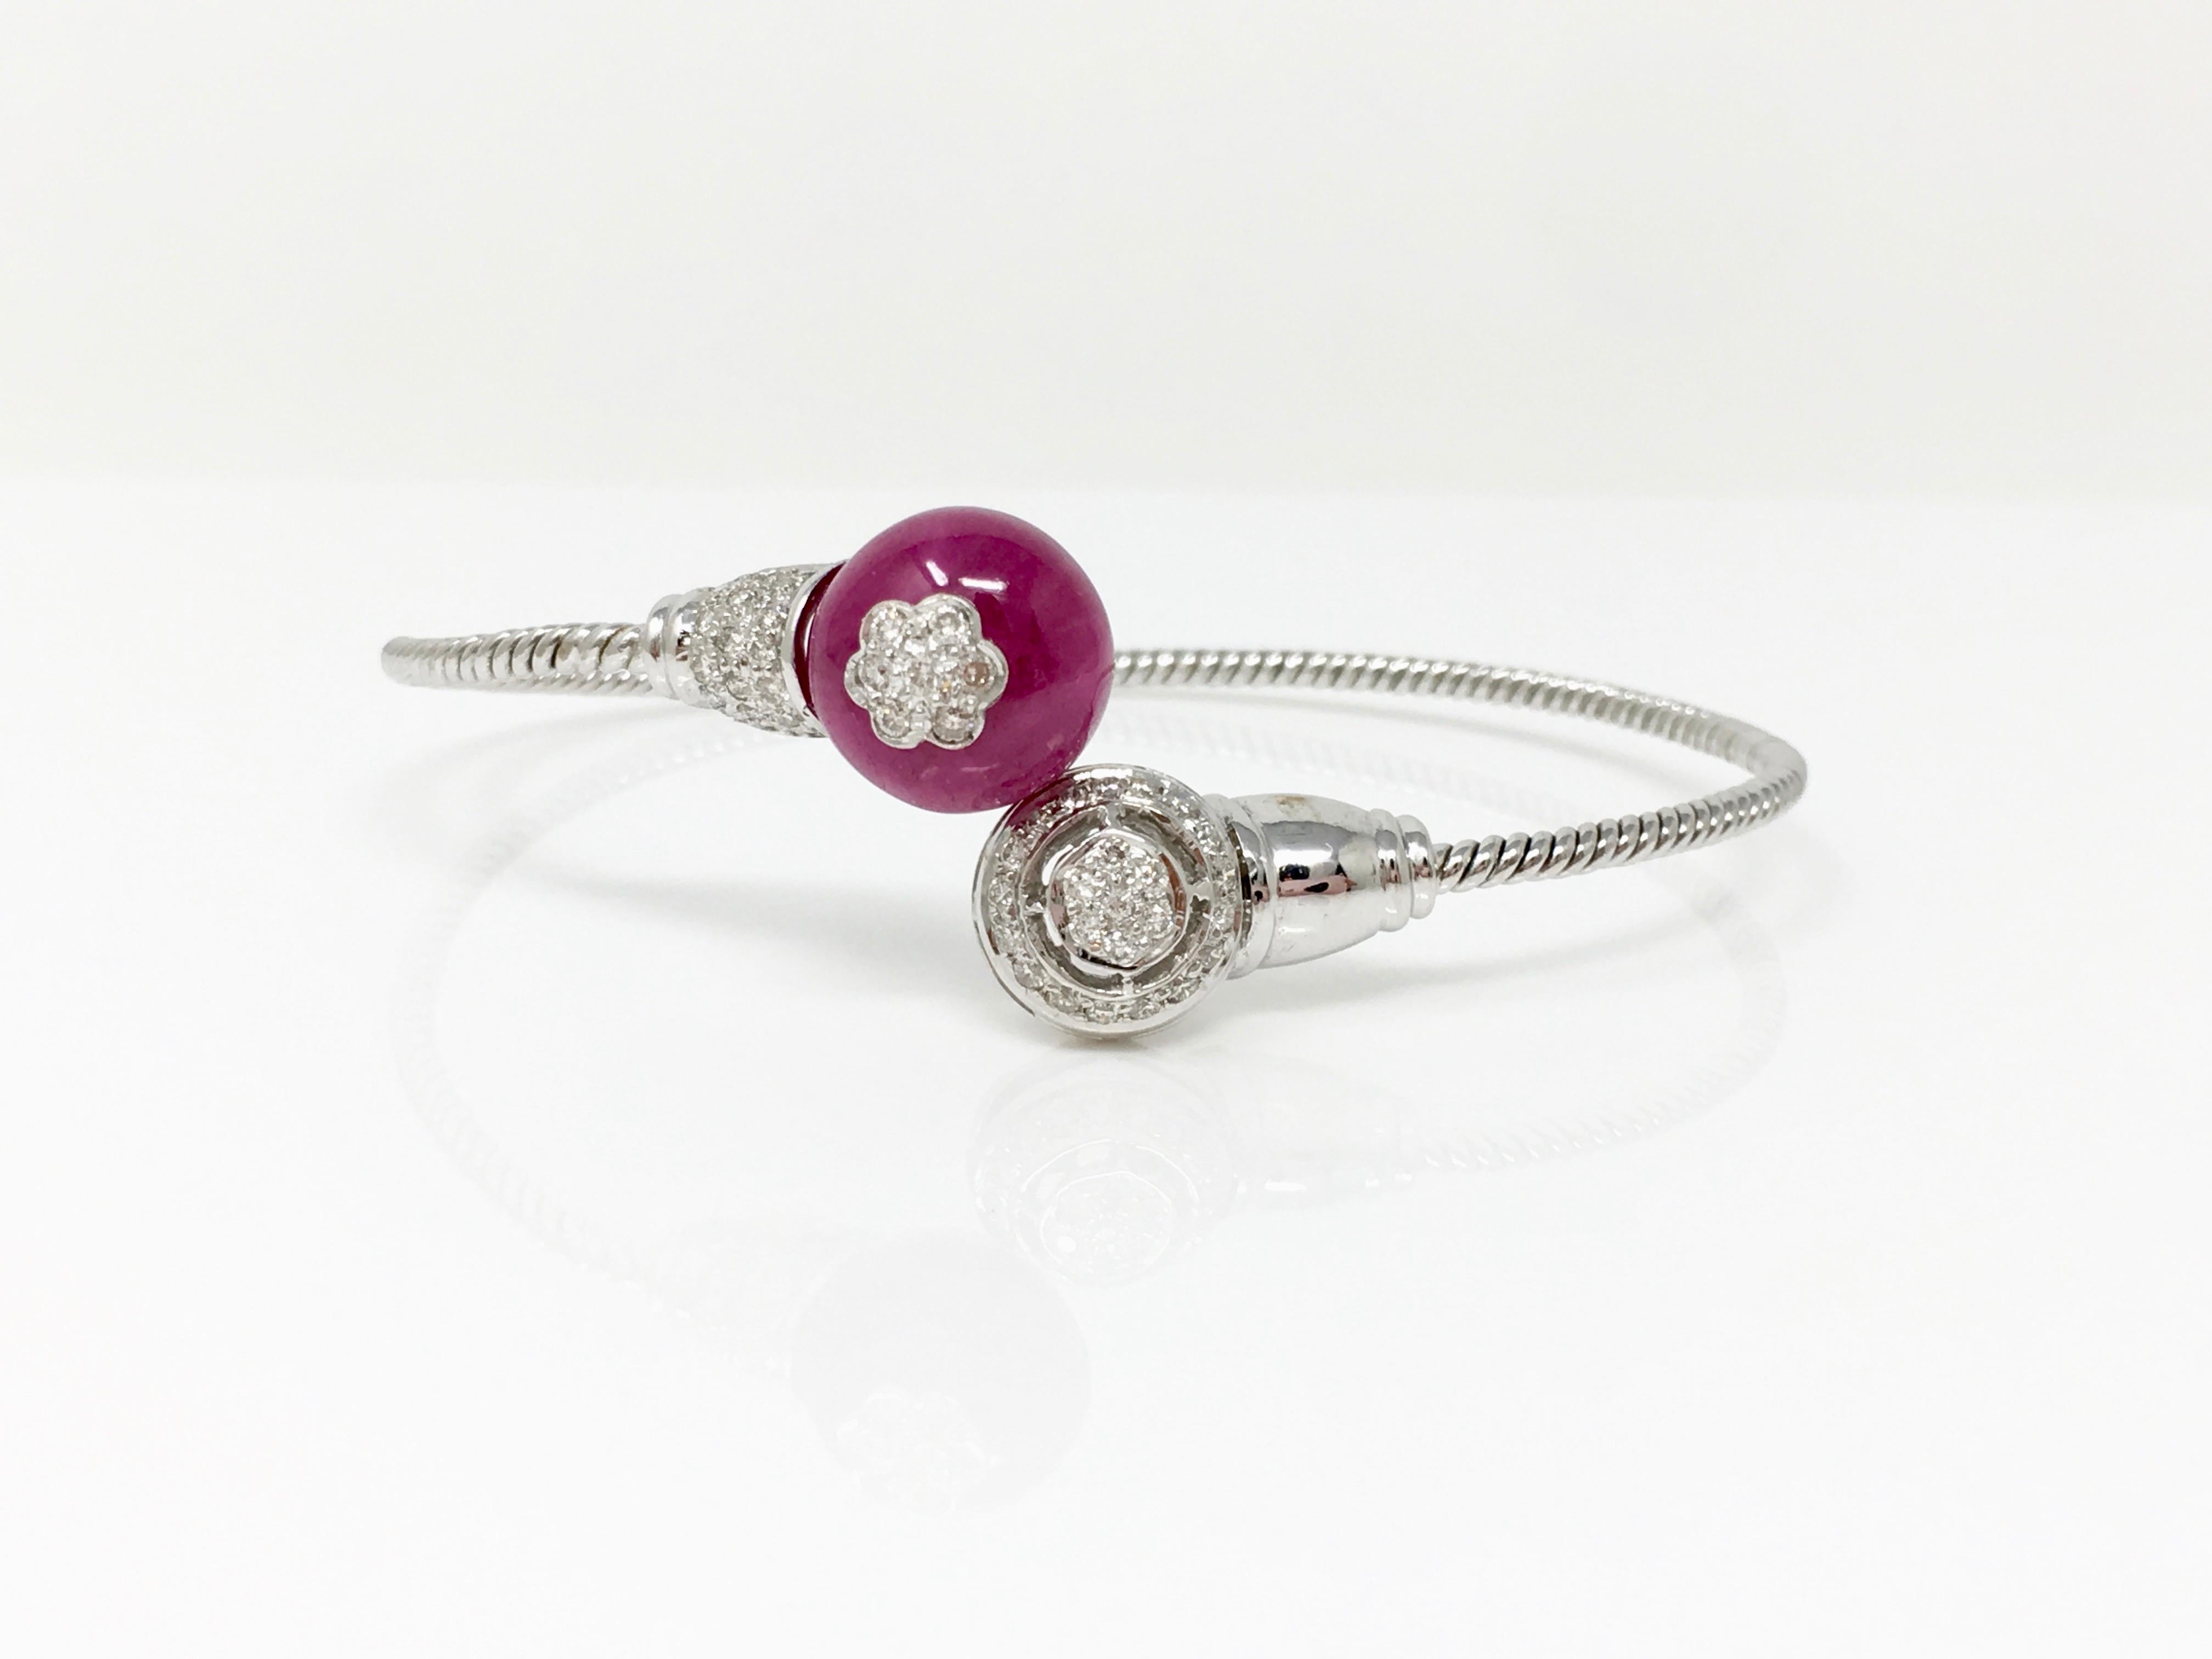 Gorgeous, elegant , perfect , flexible and adaptable bangle features rubellite weighing 14 carat and white round brilliant diamond weighing 0.62 carat ( GH color and VS clarity). This is beautifully hand created by Moguldiam inc in 18k white gold.